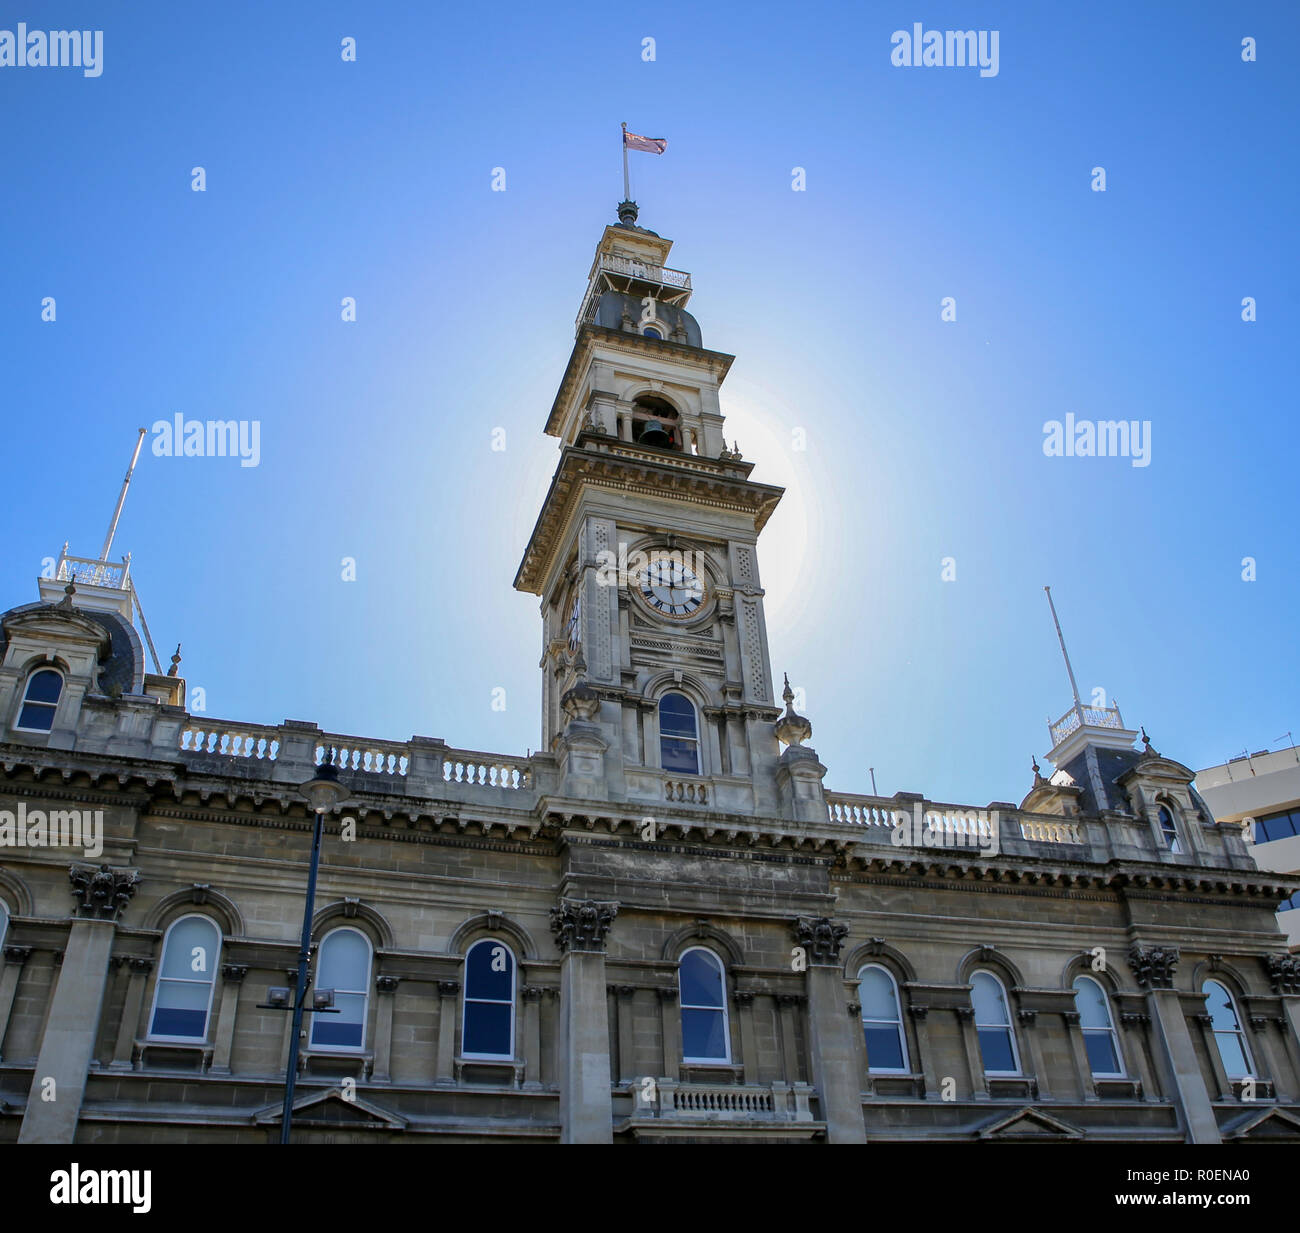 The clock tower on an old stone building in the city of Dunedin is lit up in the sunlight Stock Photo